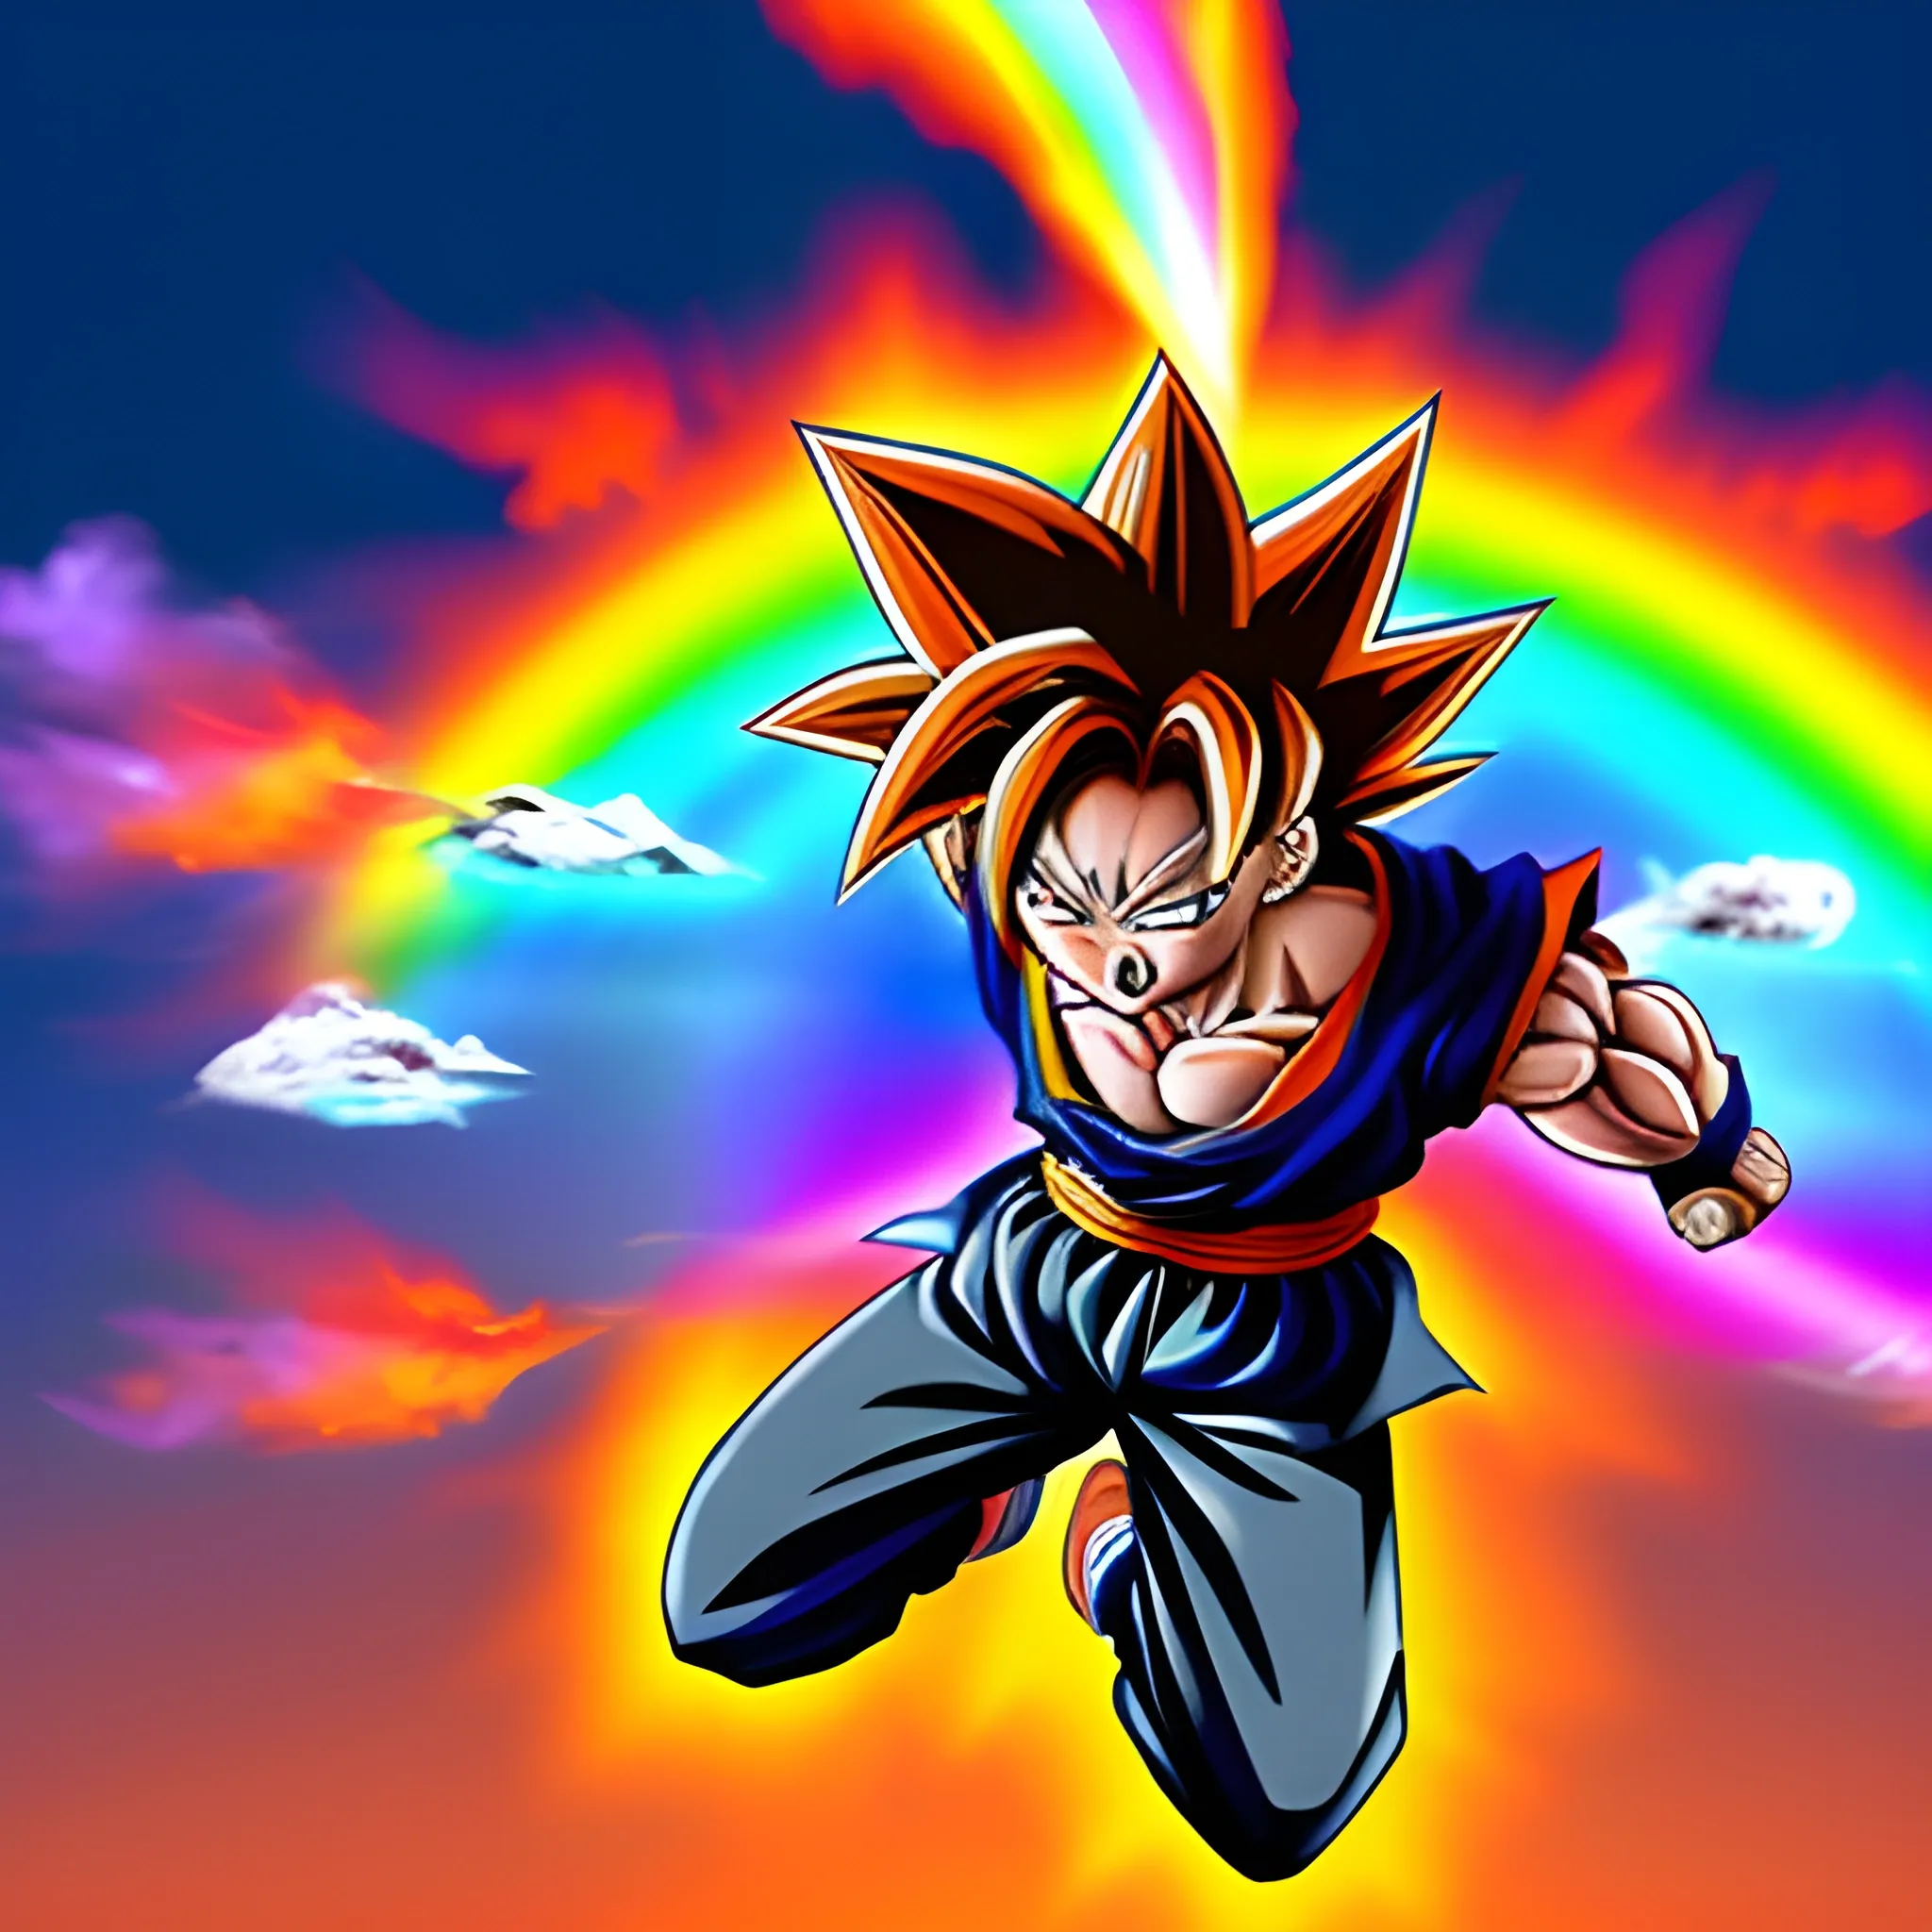 Male Anime Character Goku Super Saiyan 4 in the center, Stable Diffusion